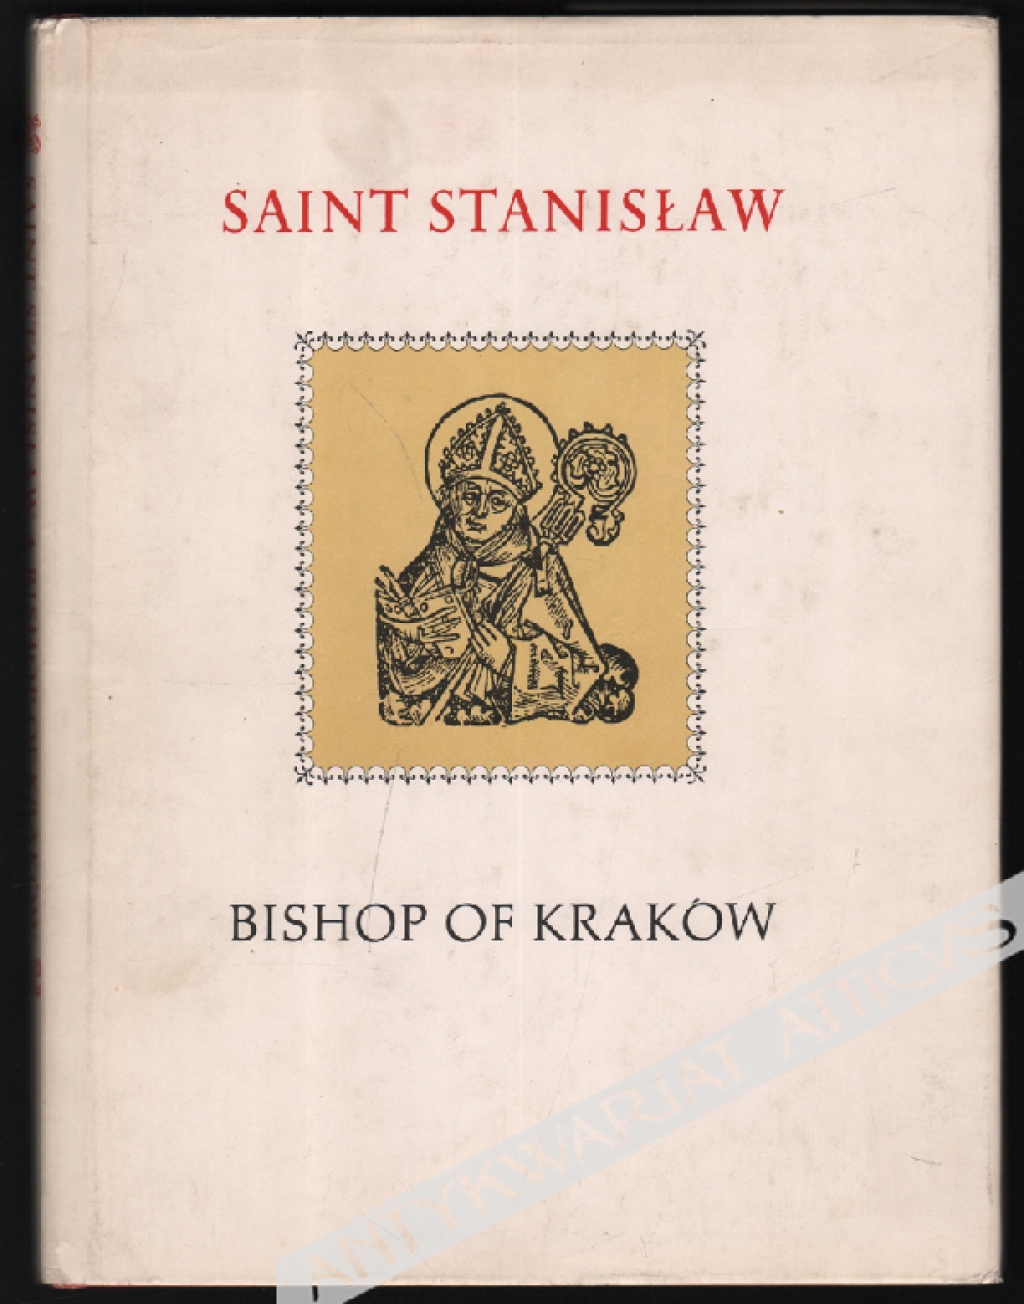 Saint Stanisław Bishop of Krakow. In Commemoration of the 900th Anniversary of His Martyrdom in 1079.